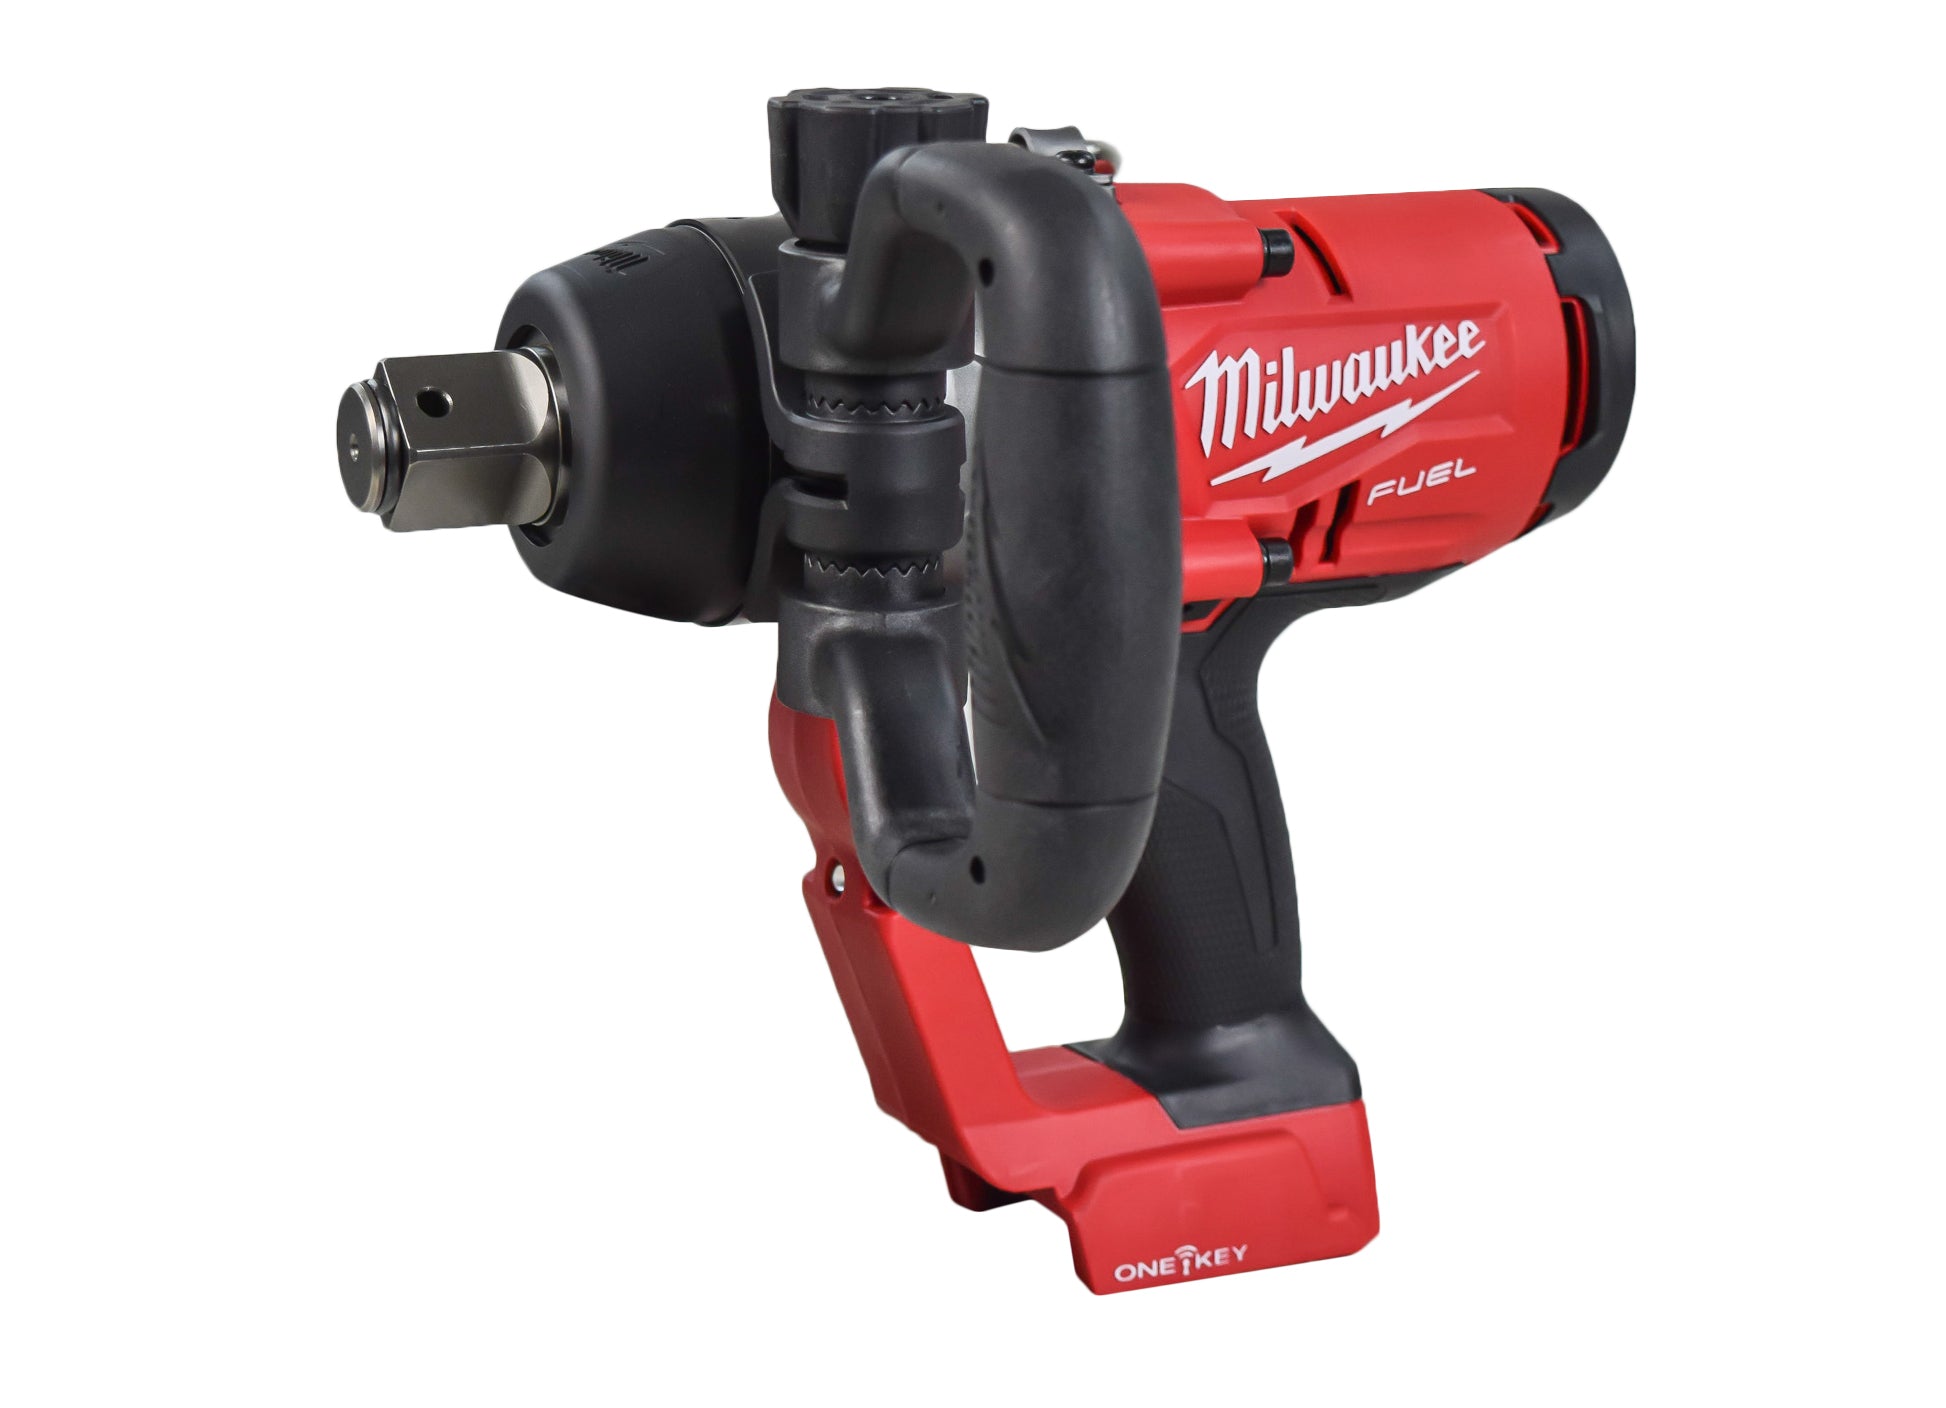 Milwaukee-2867-20-M18-FUEL-1-in.-High-Torque-Impact-Wrench-with-ONE-KEY-Tool-Only-image-3